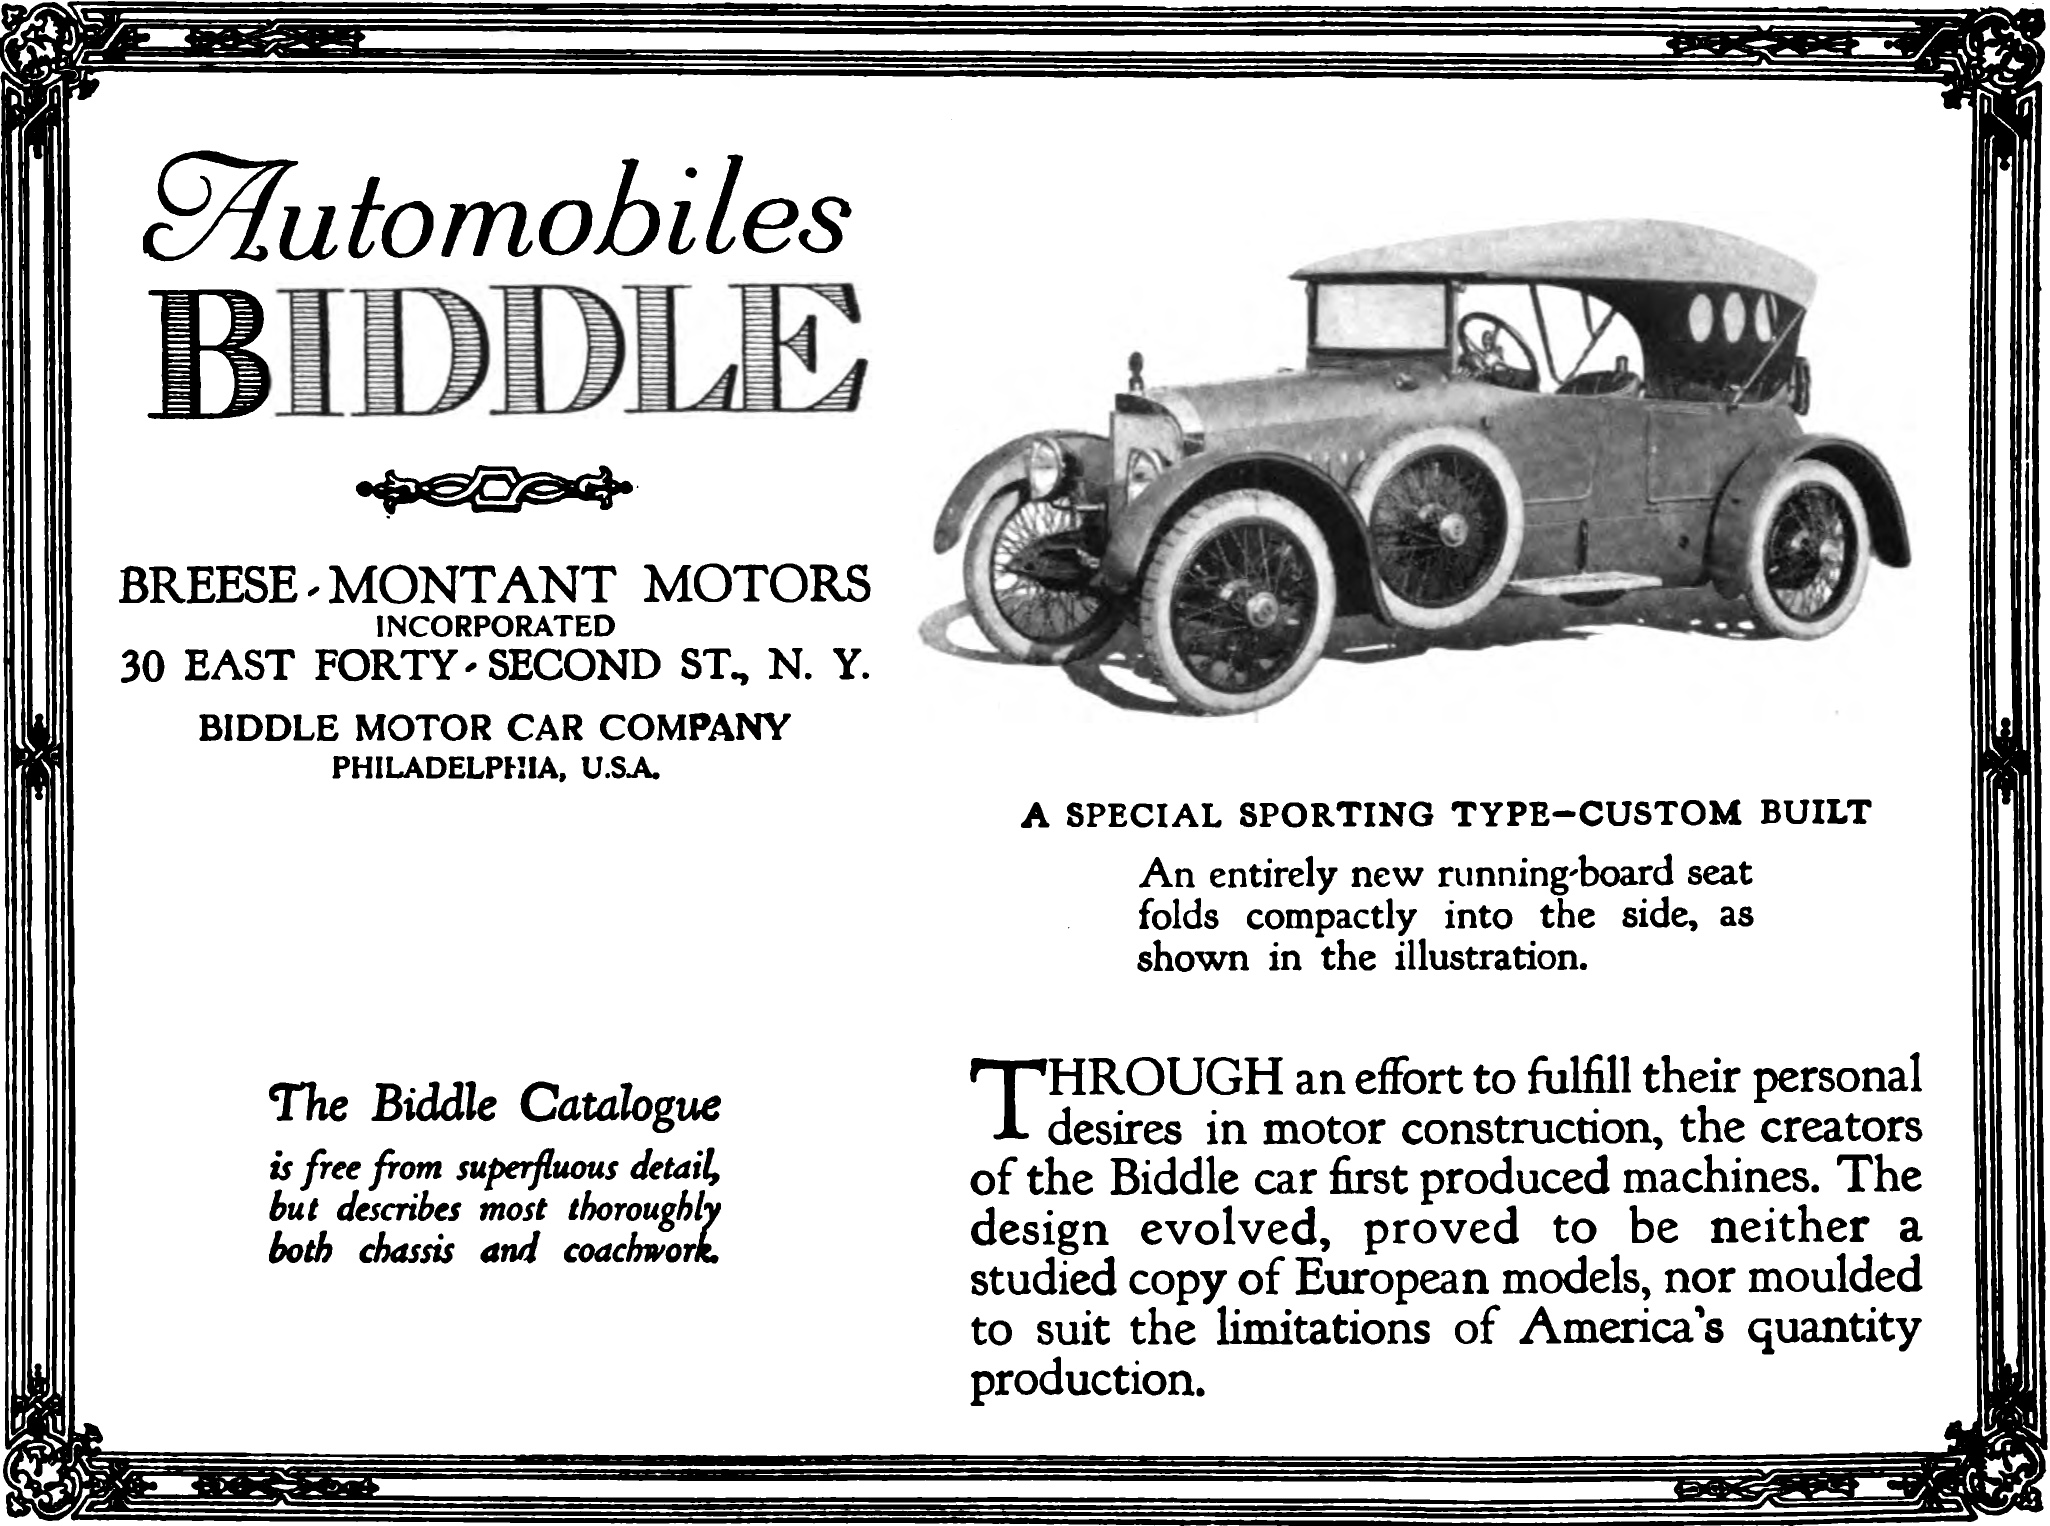 advertisement for a new car